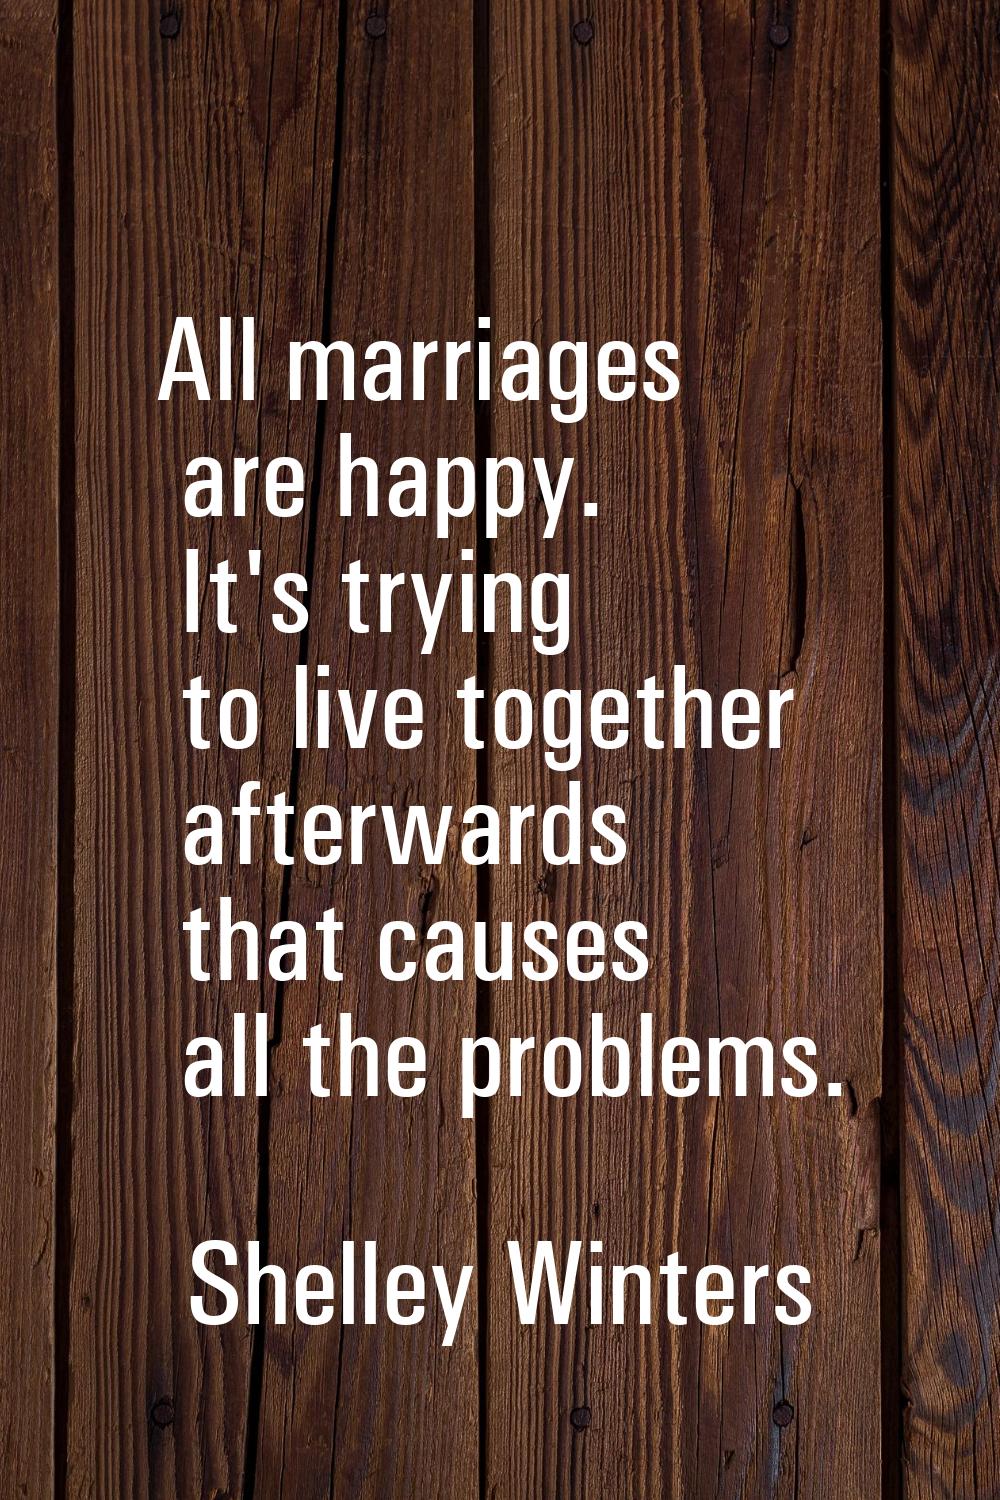 All marriages are happy. It's trying to live together afterwards that causes all the problems.